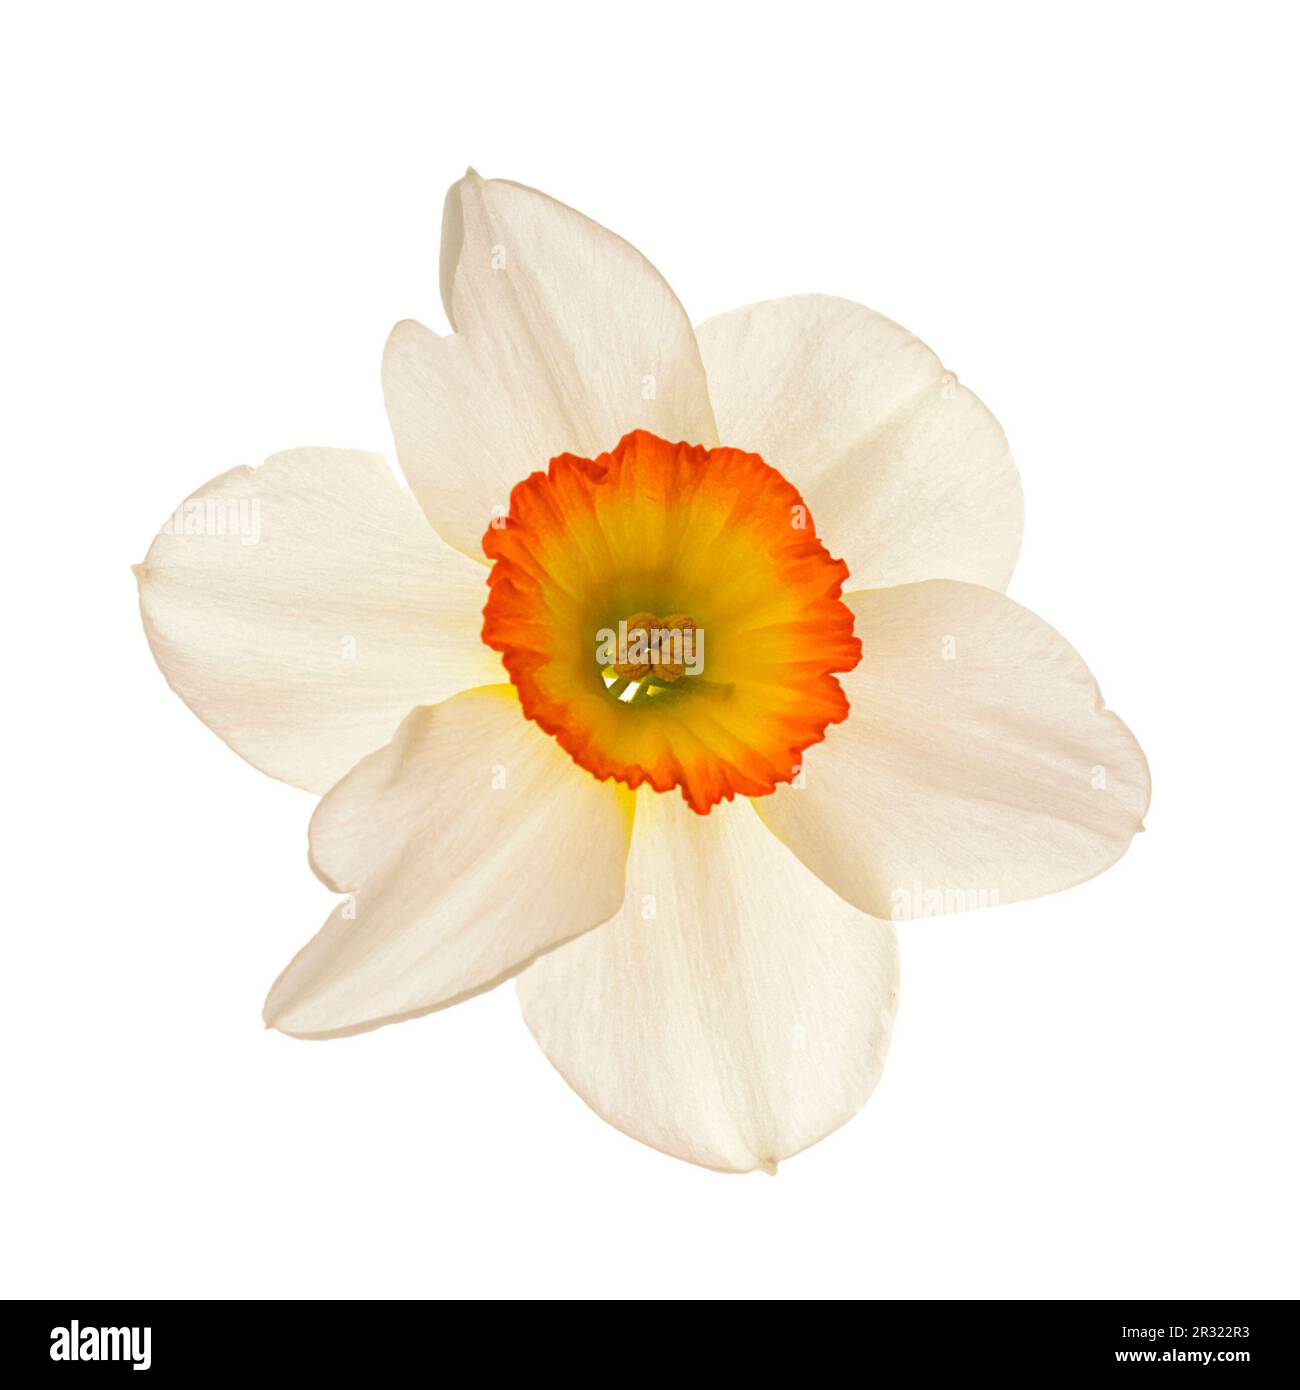 Narcissus flower Stock Photo